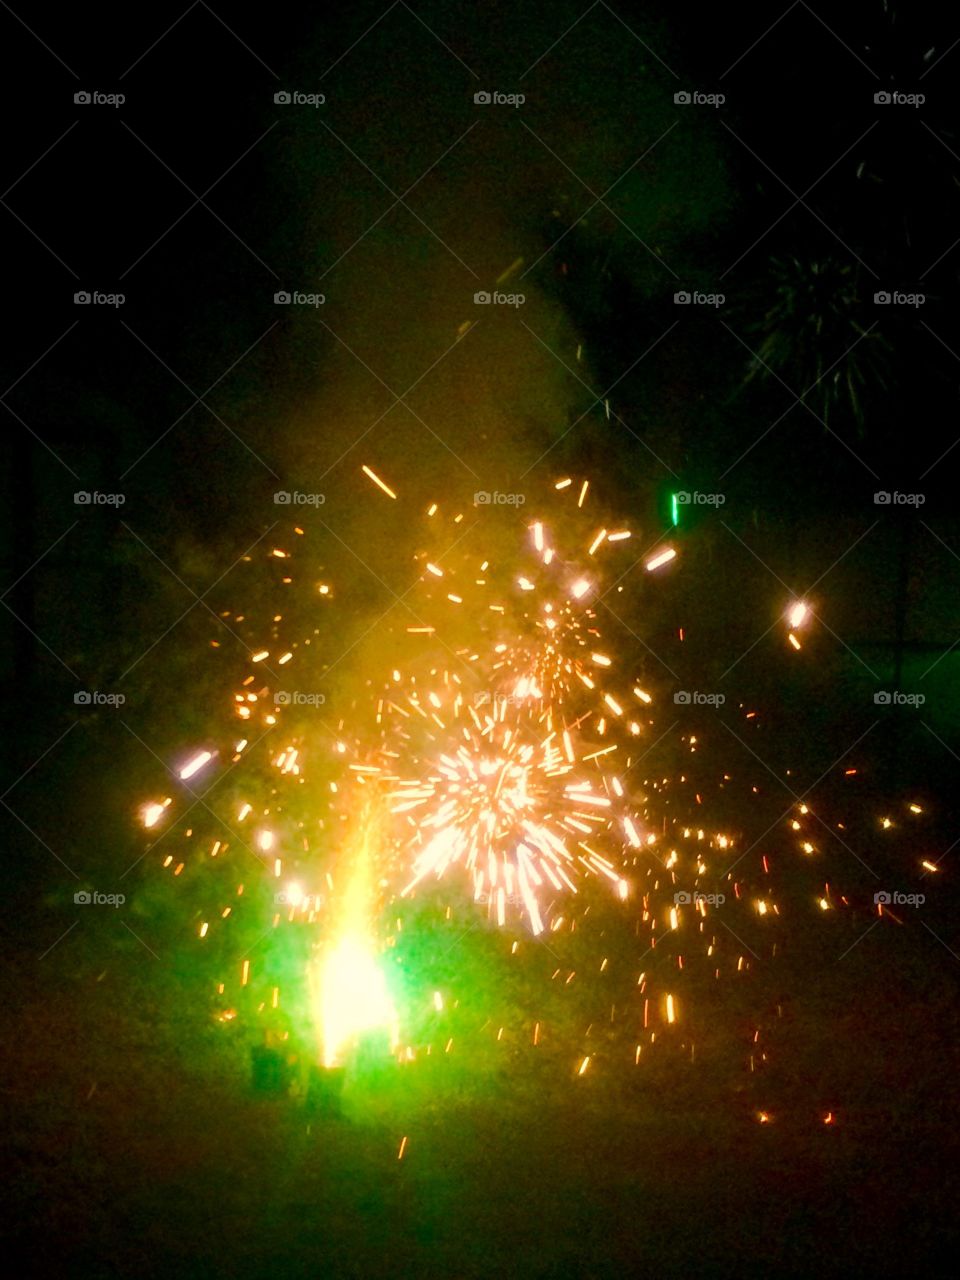 Flame, Christmas, Abstract, Celebration, Fireworks